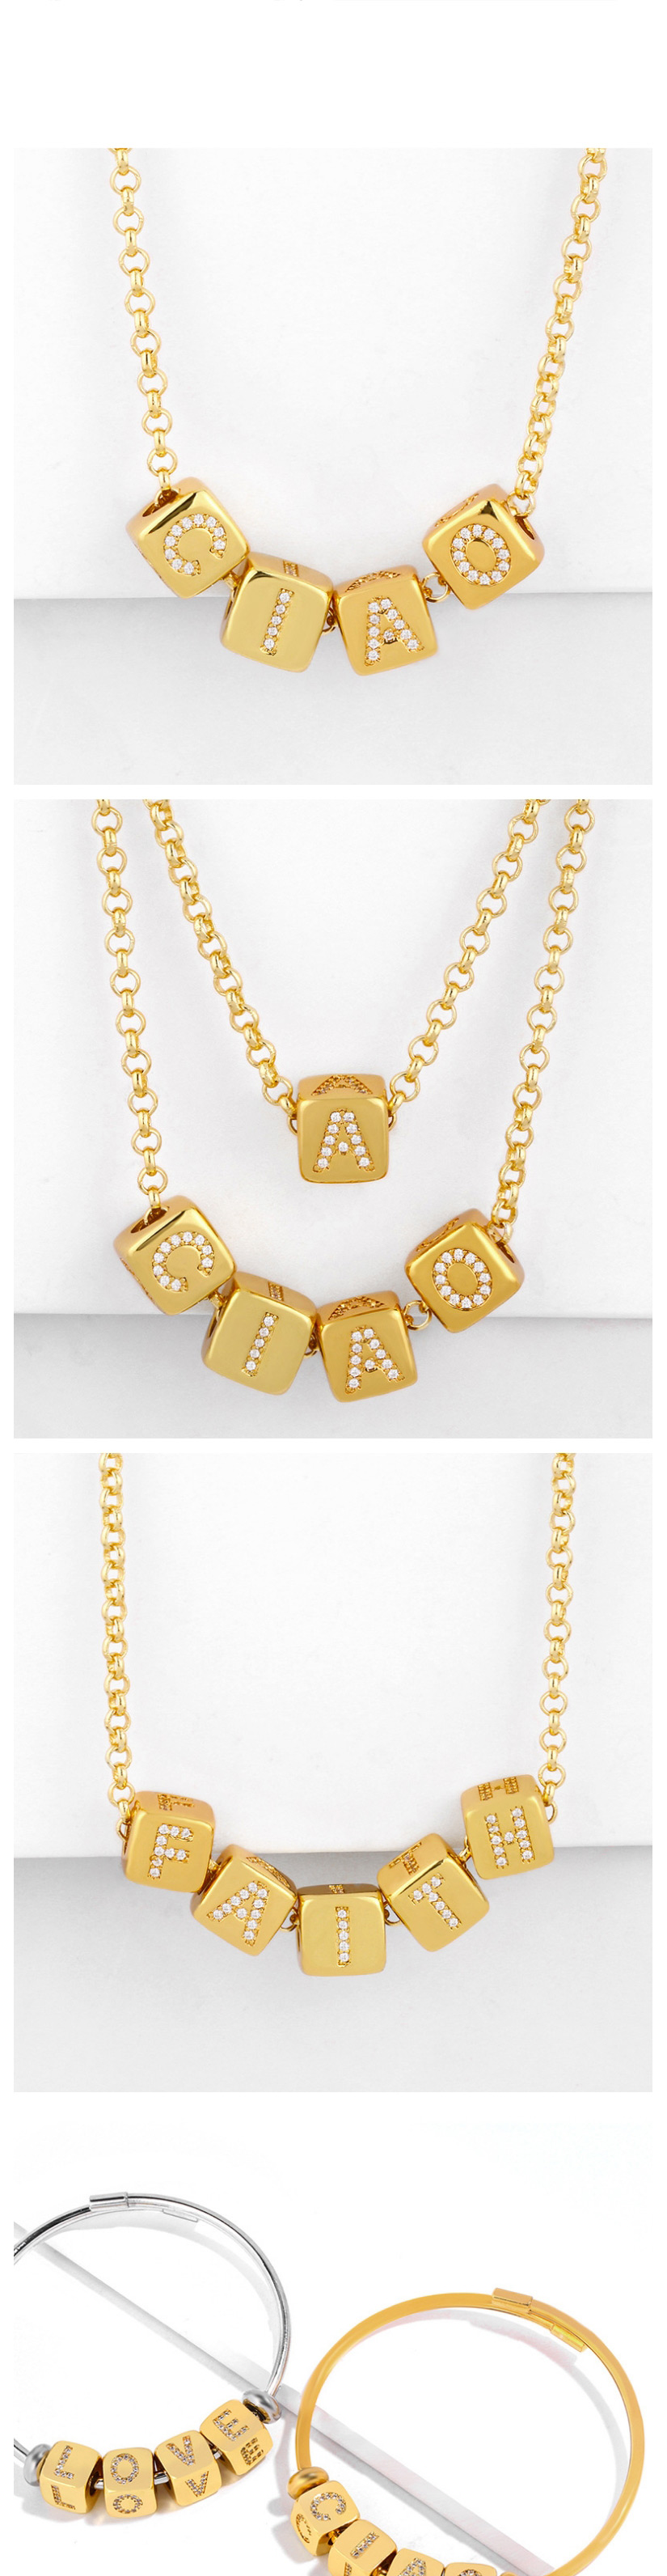 Fashion Chain (45 + 5) Alloy Hollow Chain Necklace,Necklaces